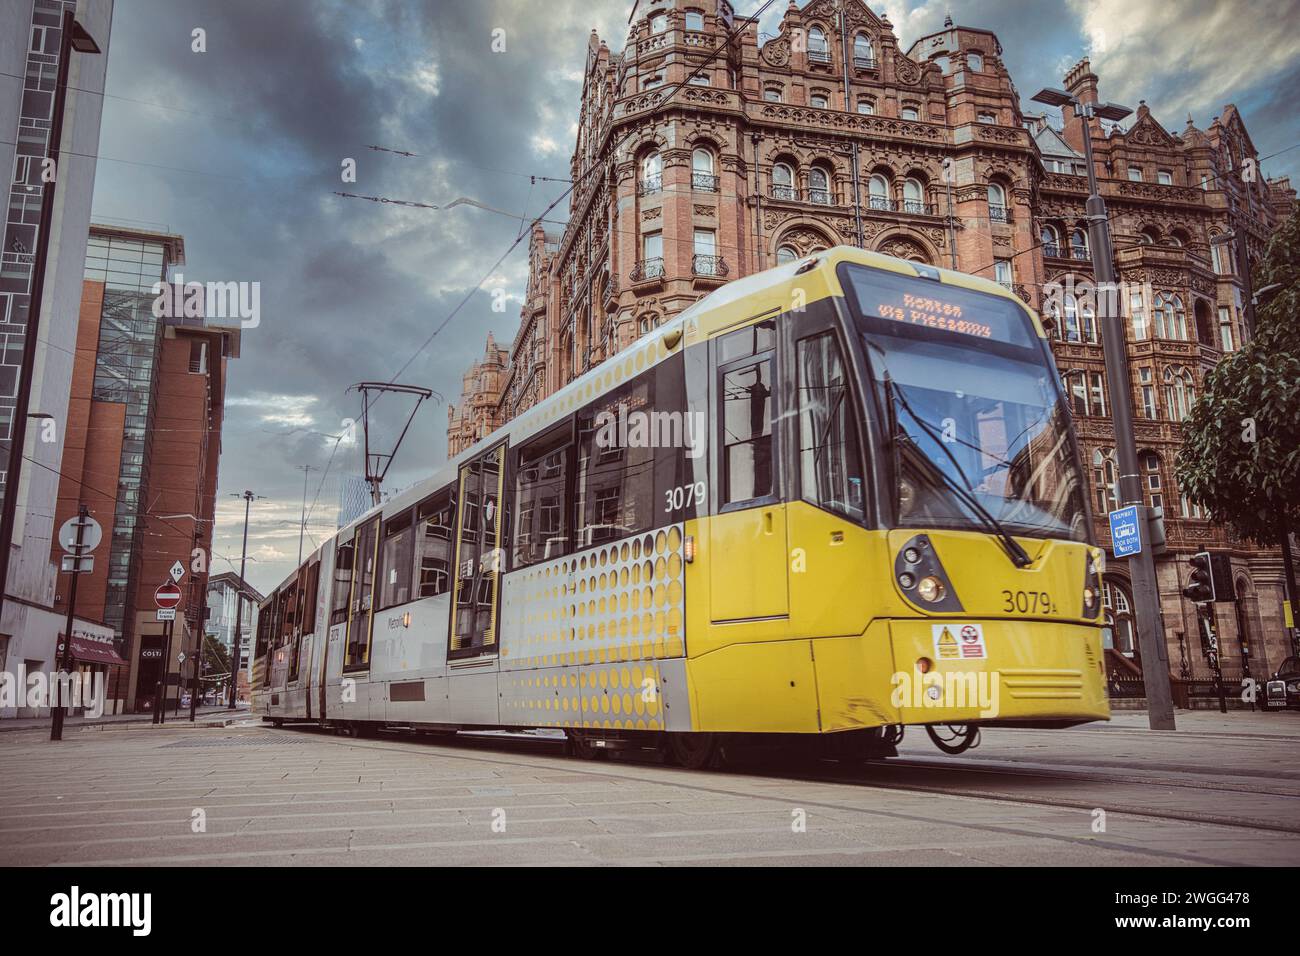 A vibrant yellow tram in the streets of Manchester, UK. Stock Photo